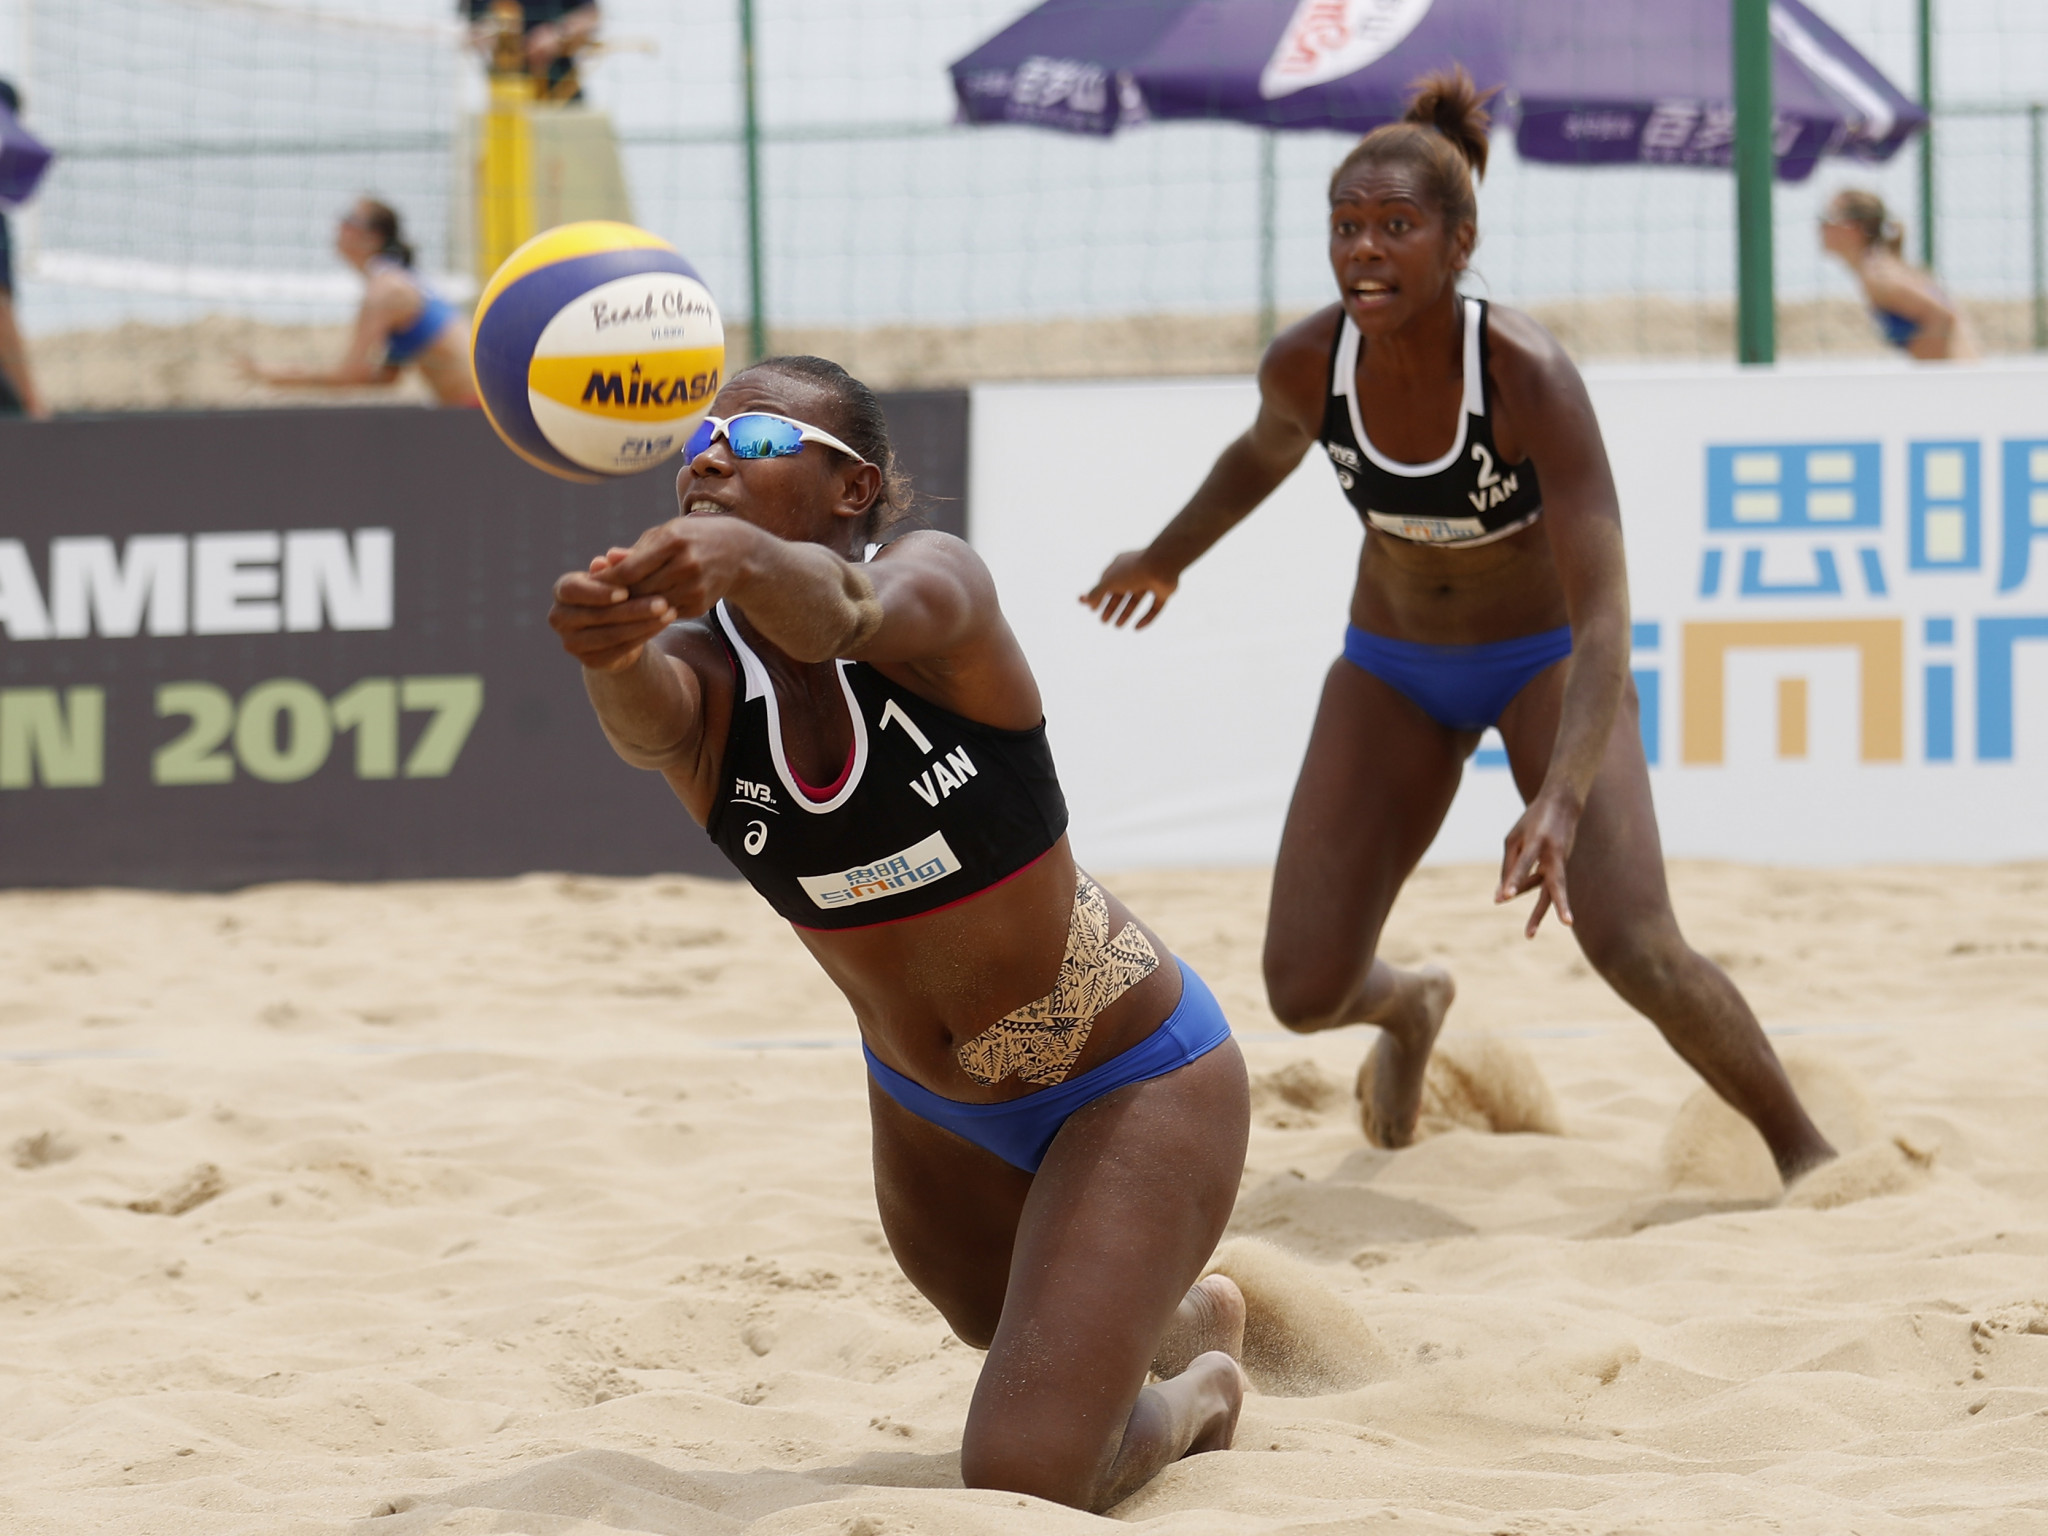 Schedule revealed for first Commonwealth Games beach volleyball competition at Gold Coast 2018